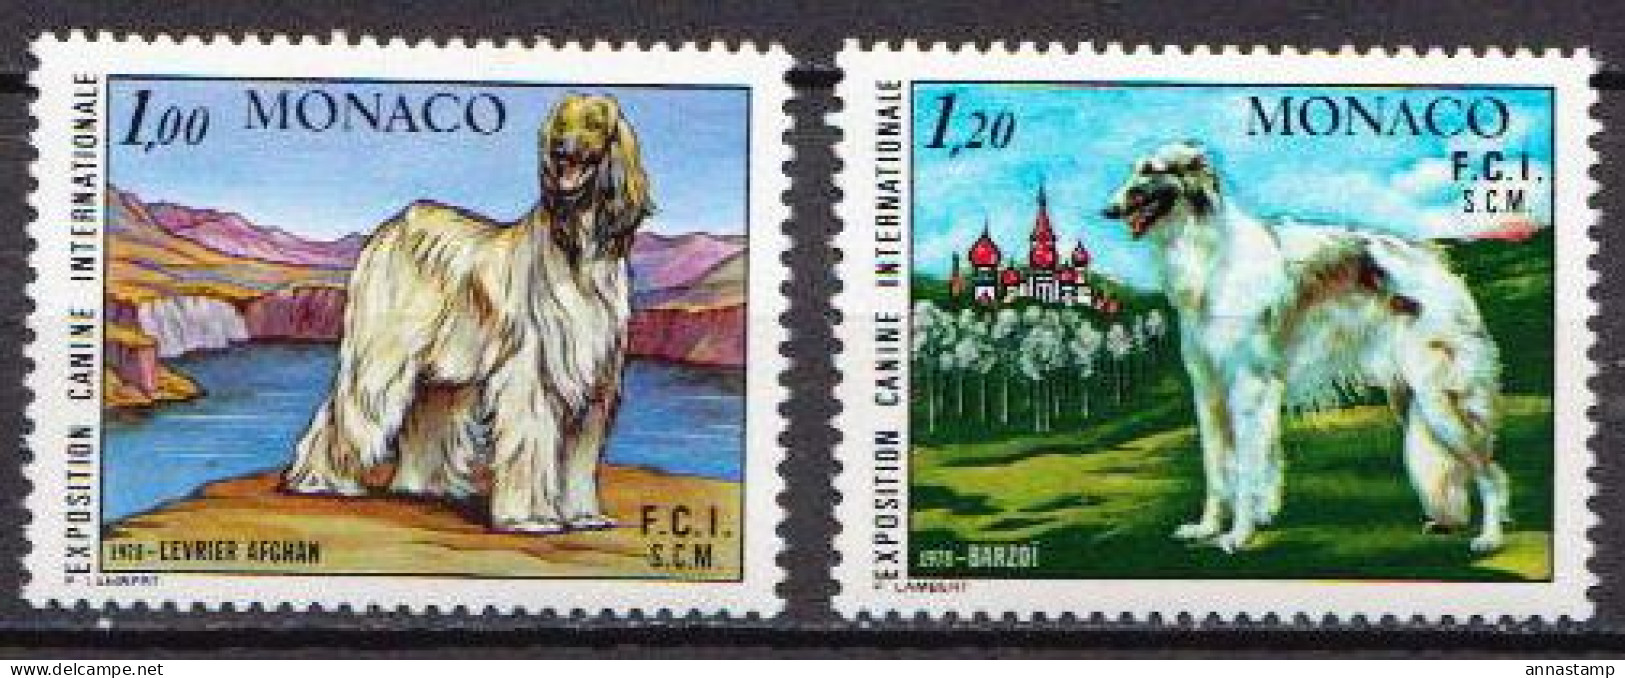 Monaco MNH Stamps - Dogs